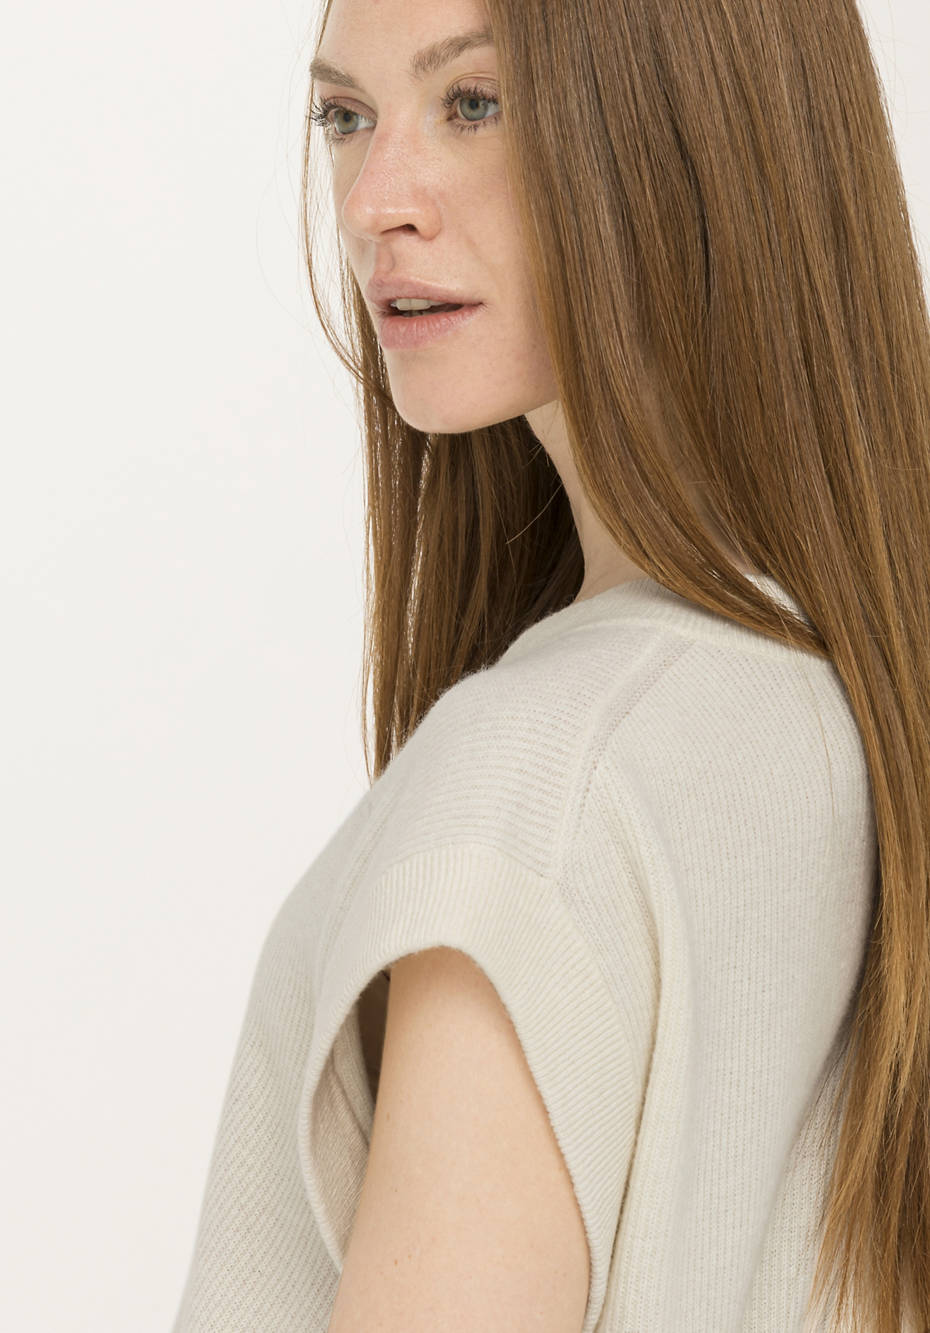 Sweater made from organic virgin wool with cashmere